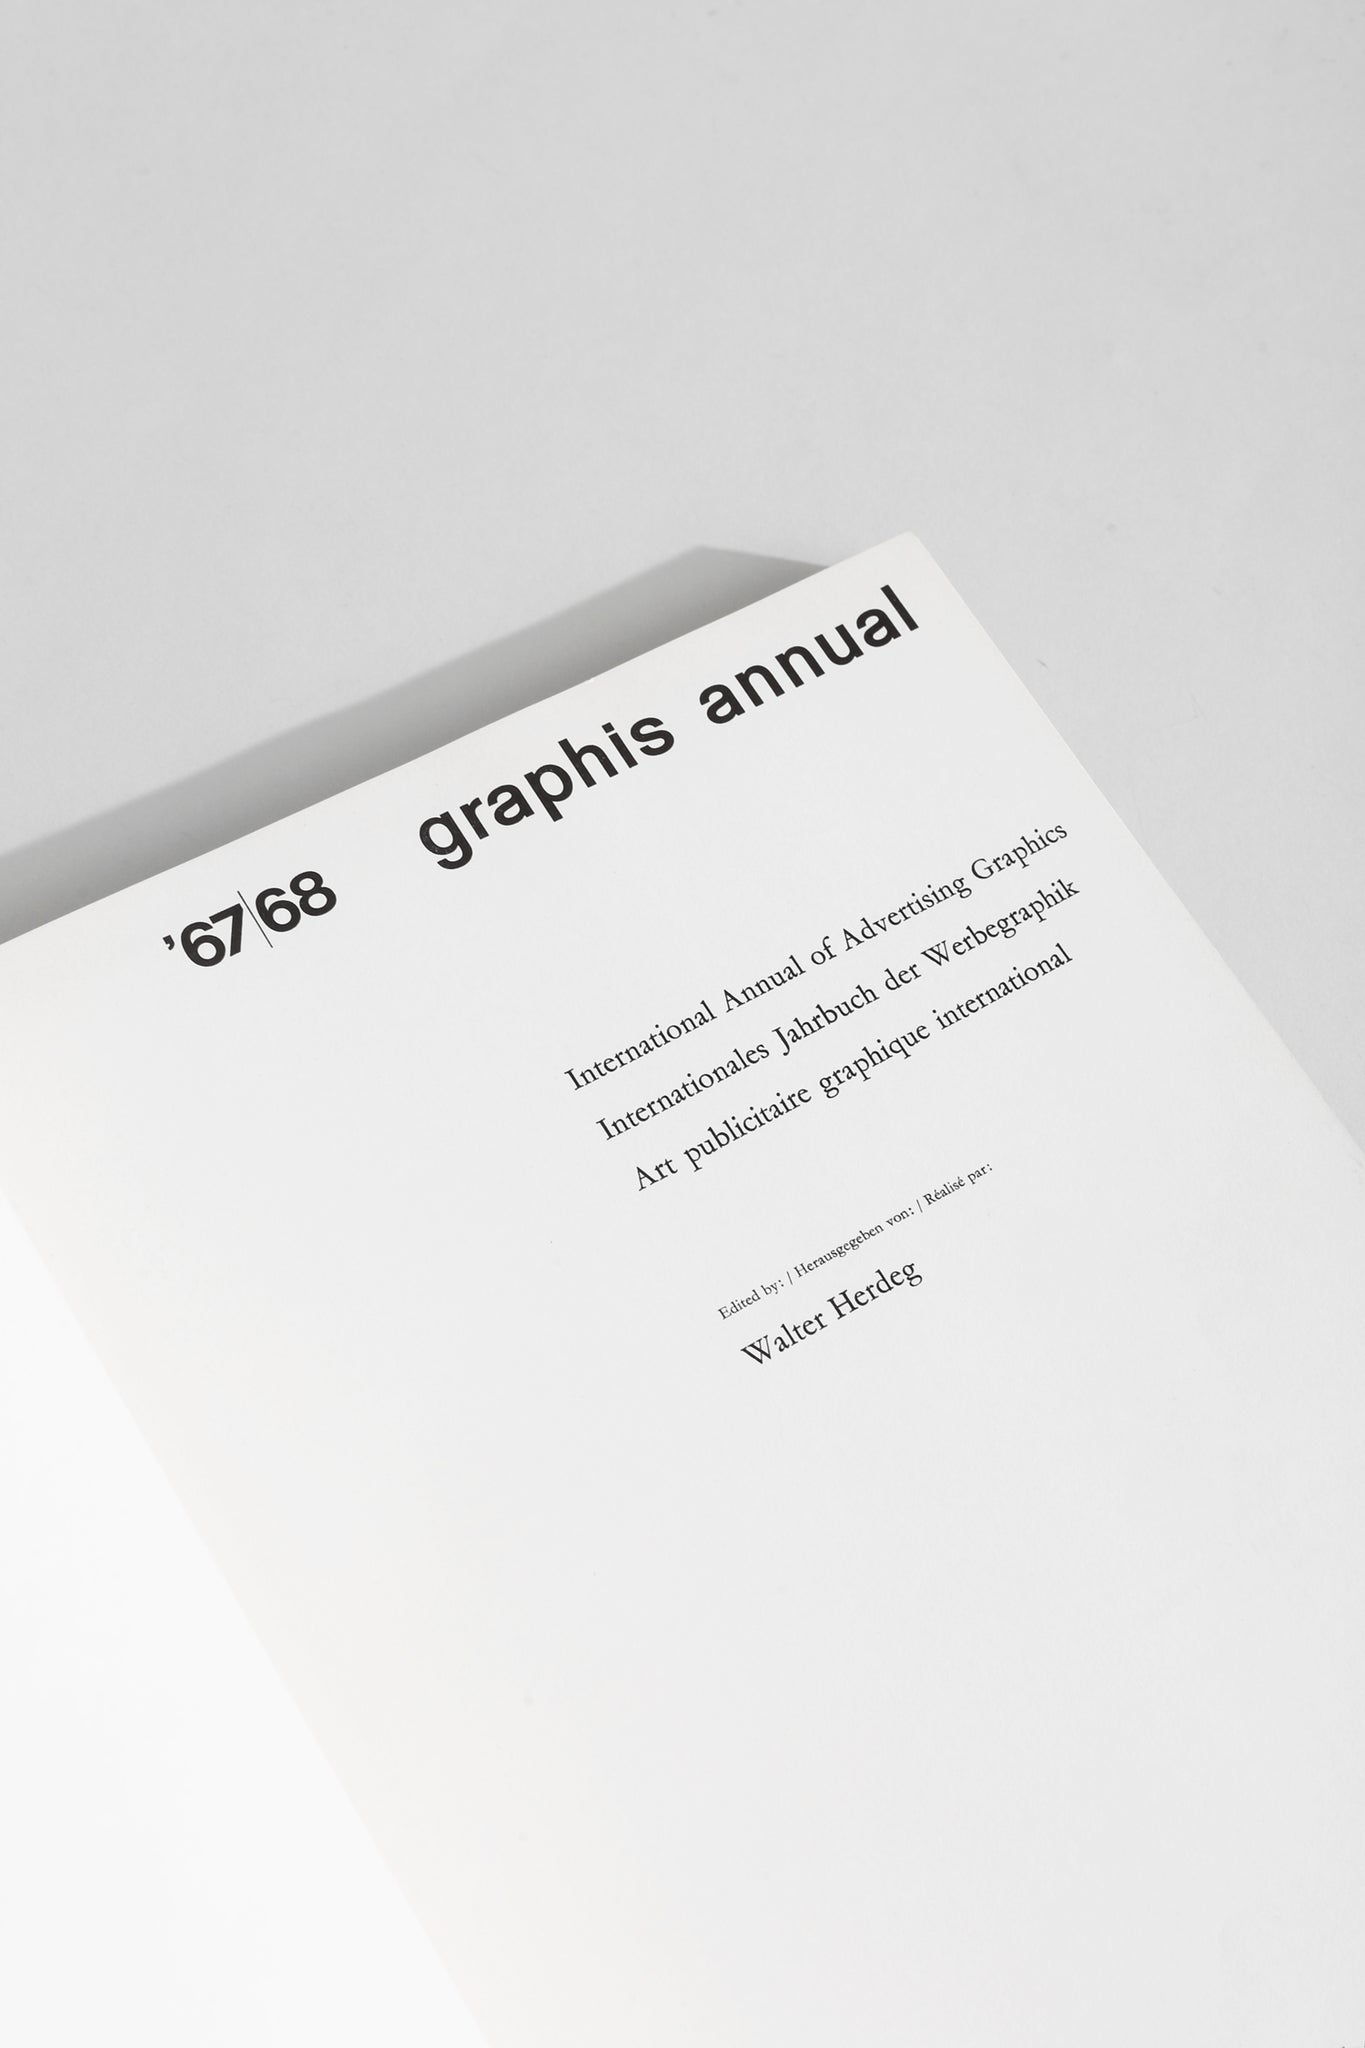 Graphis Annual 67/68 Book